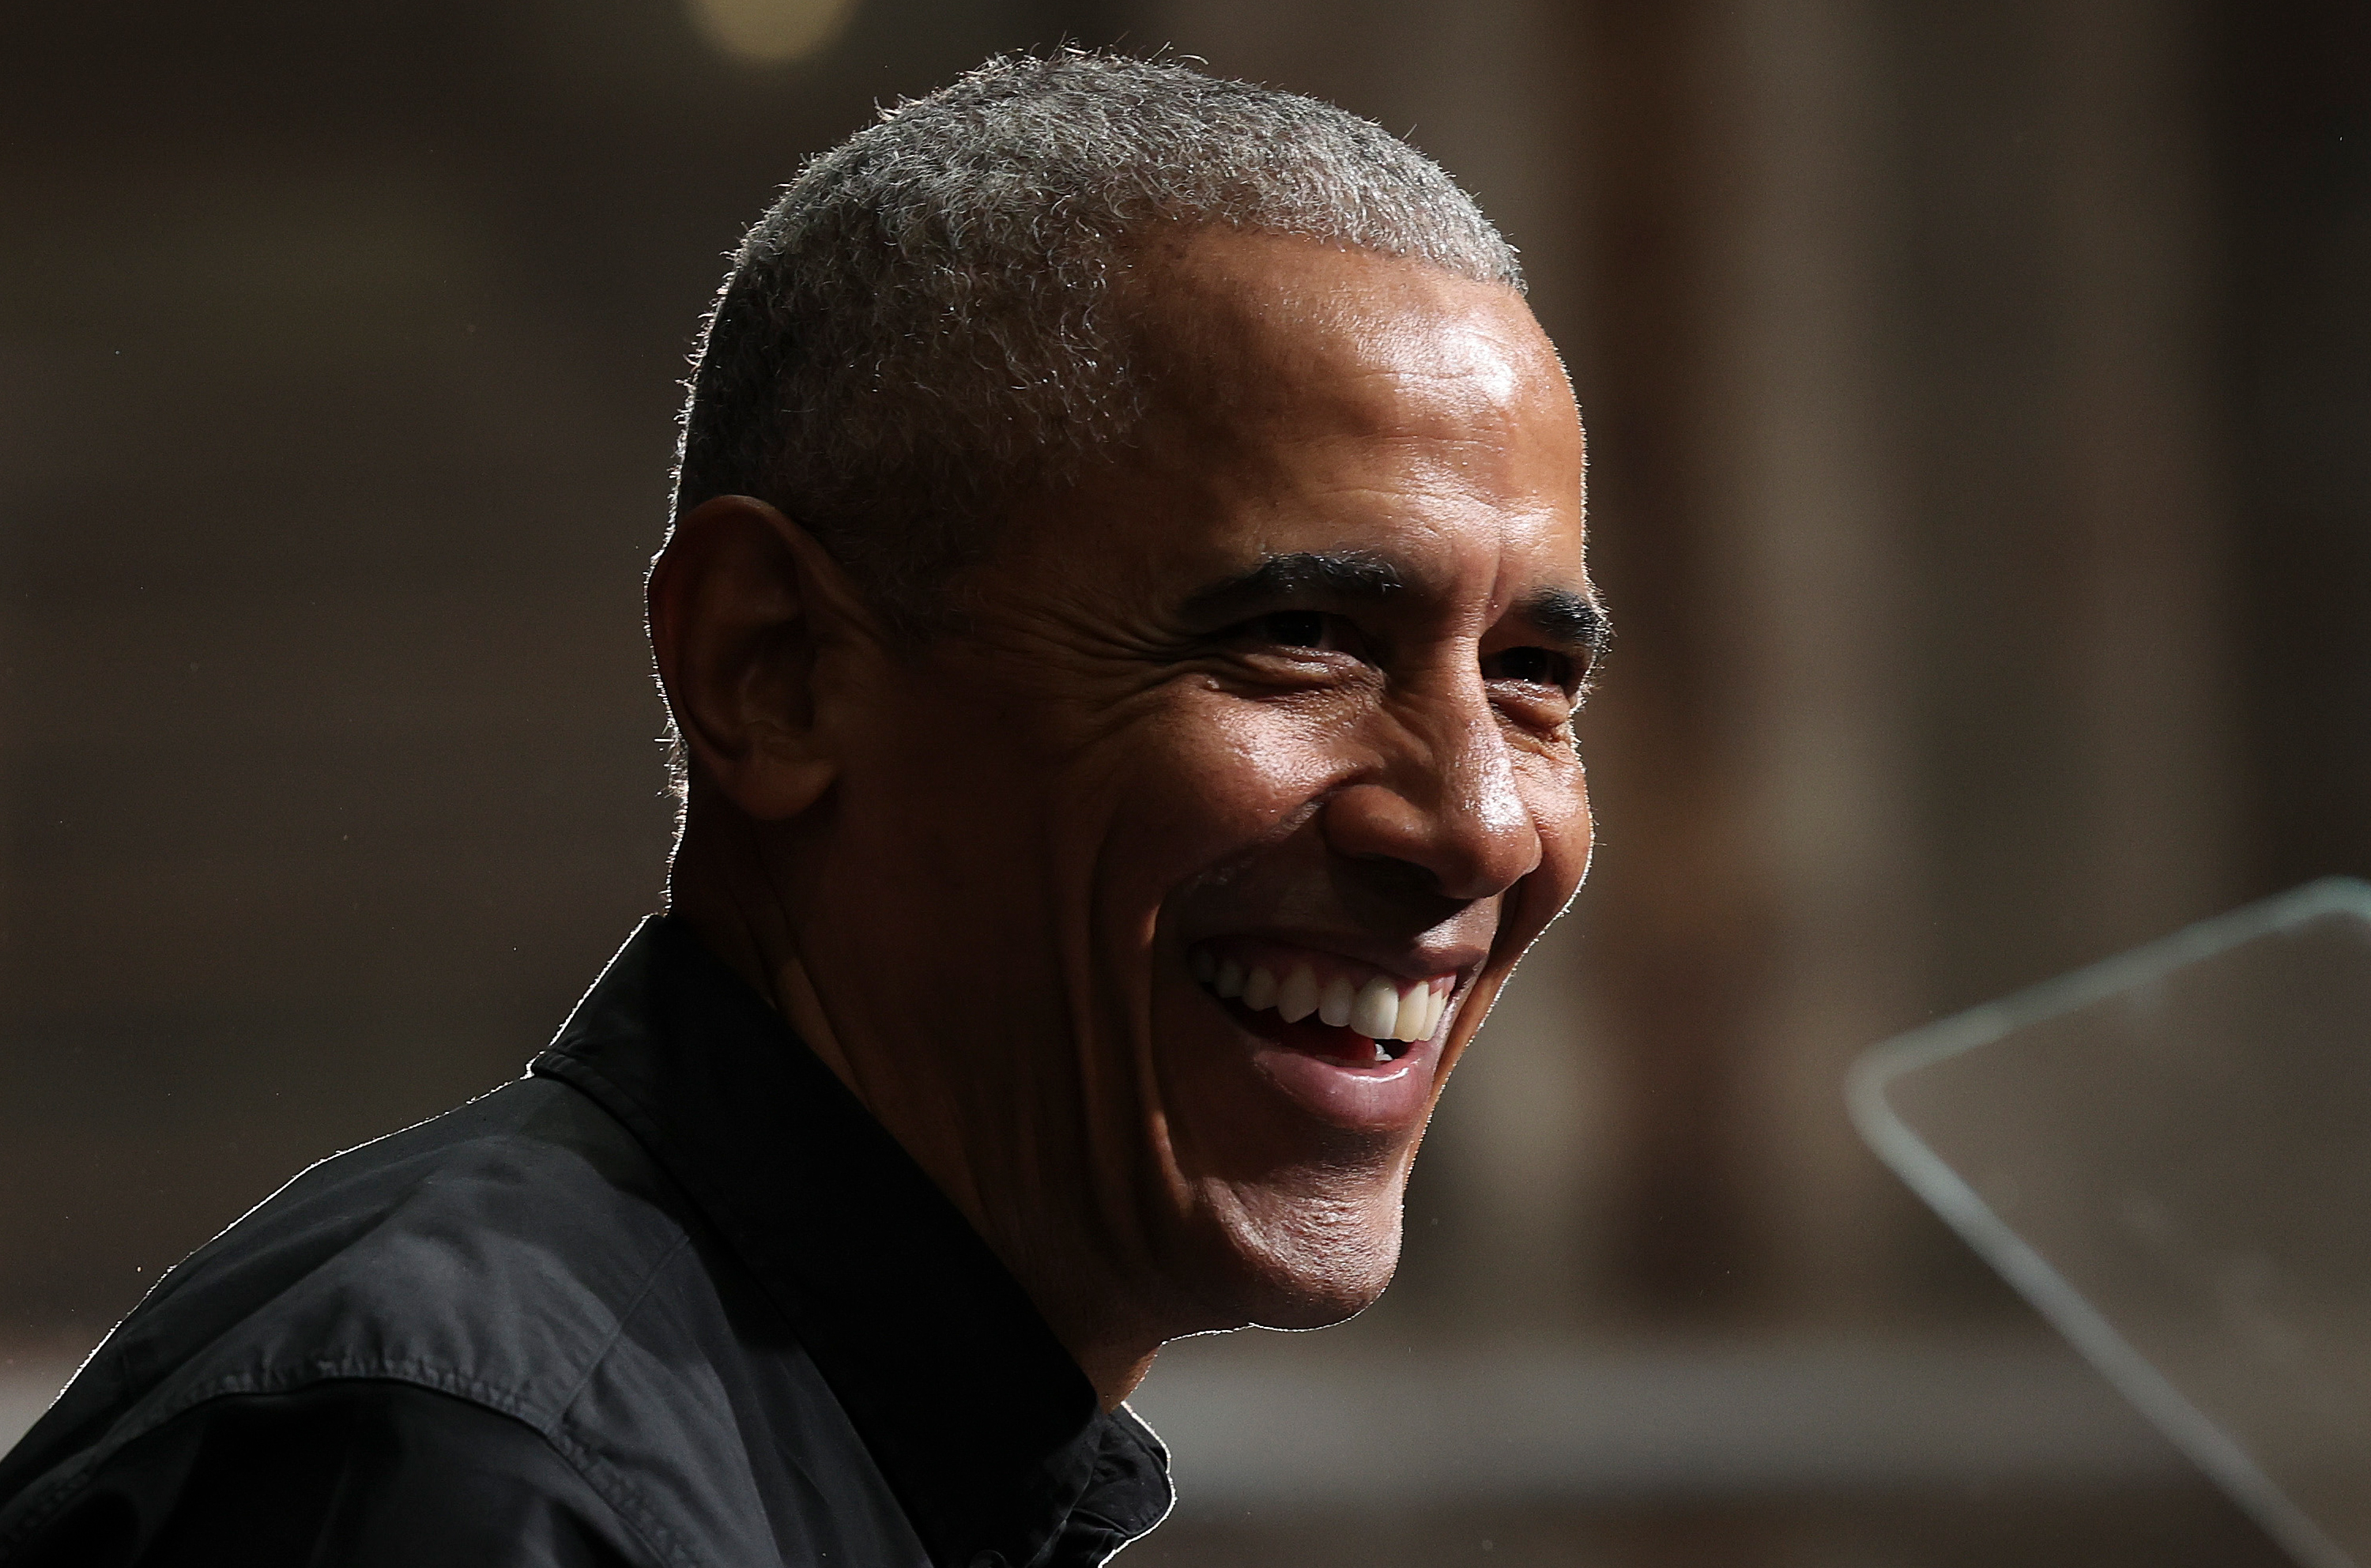 Obama celebrates Supreme Court ruling on “far-right” election theory